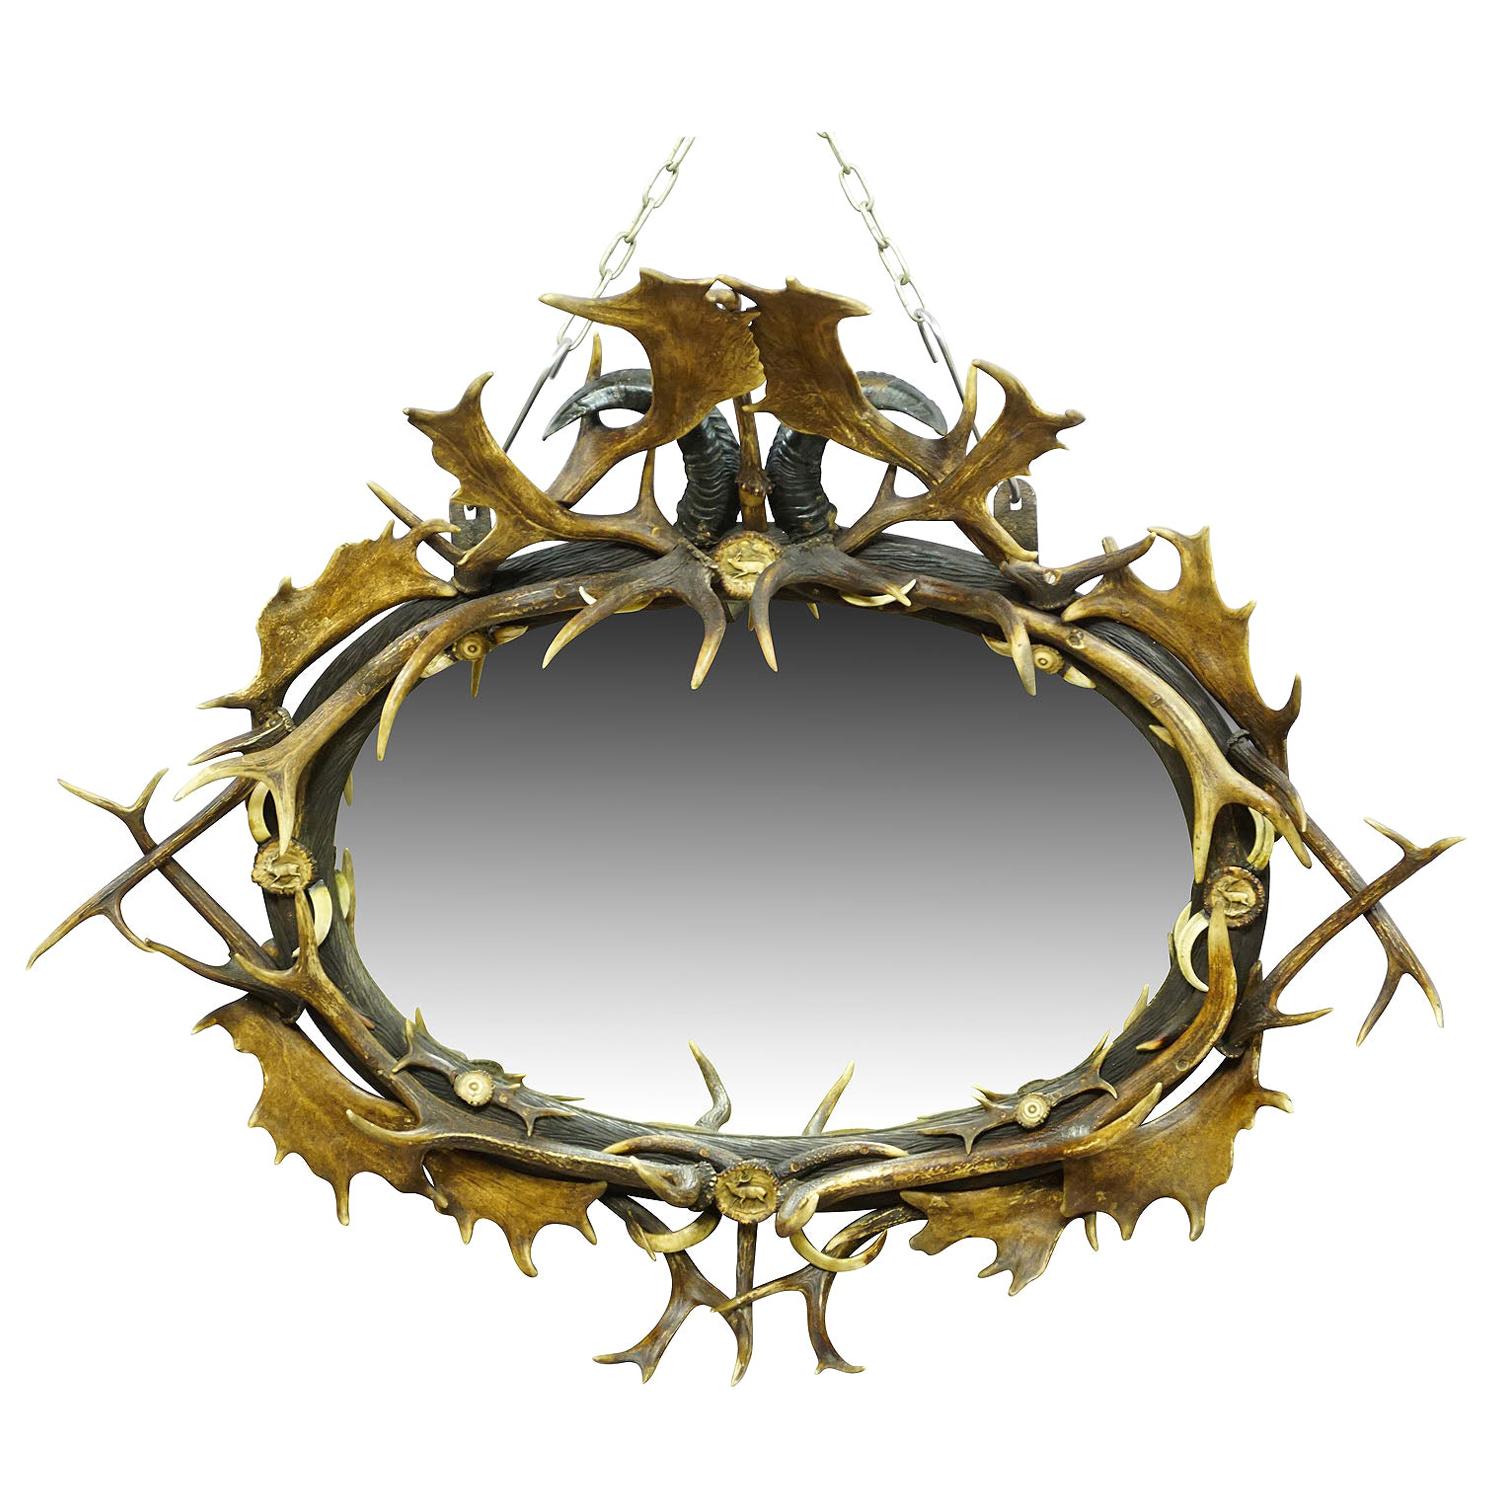 Antique Black Forest Mirror with Rustic Antler Decorations, ca. 1900